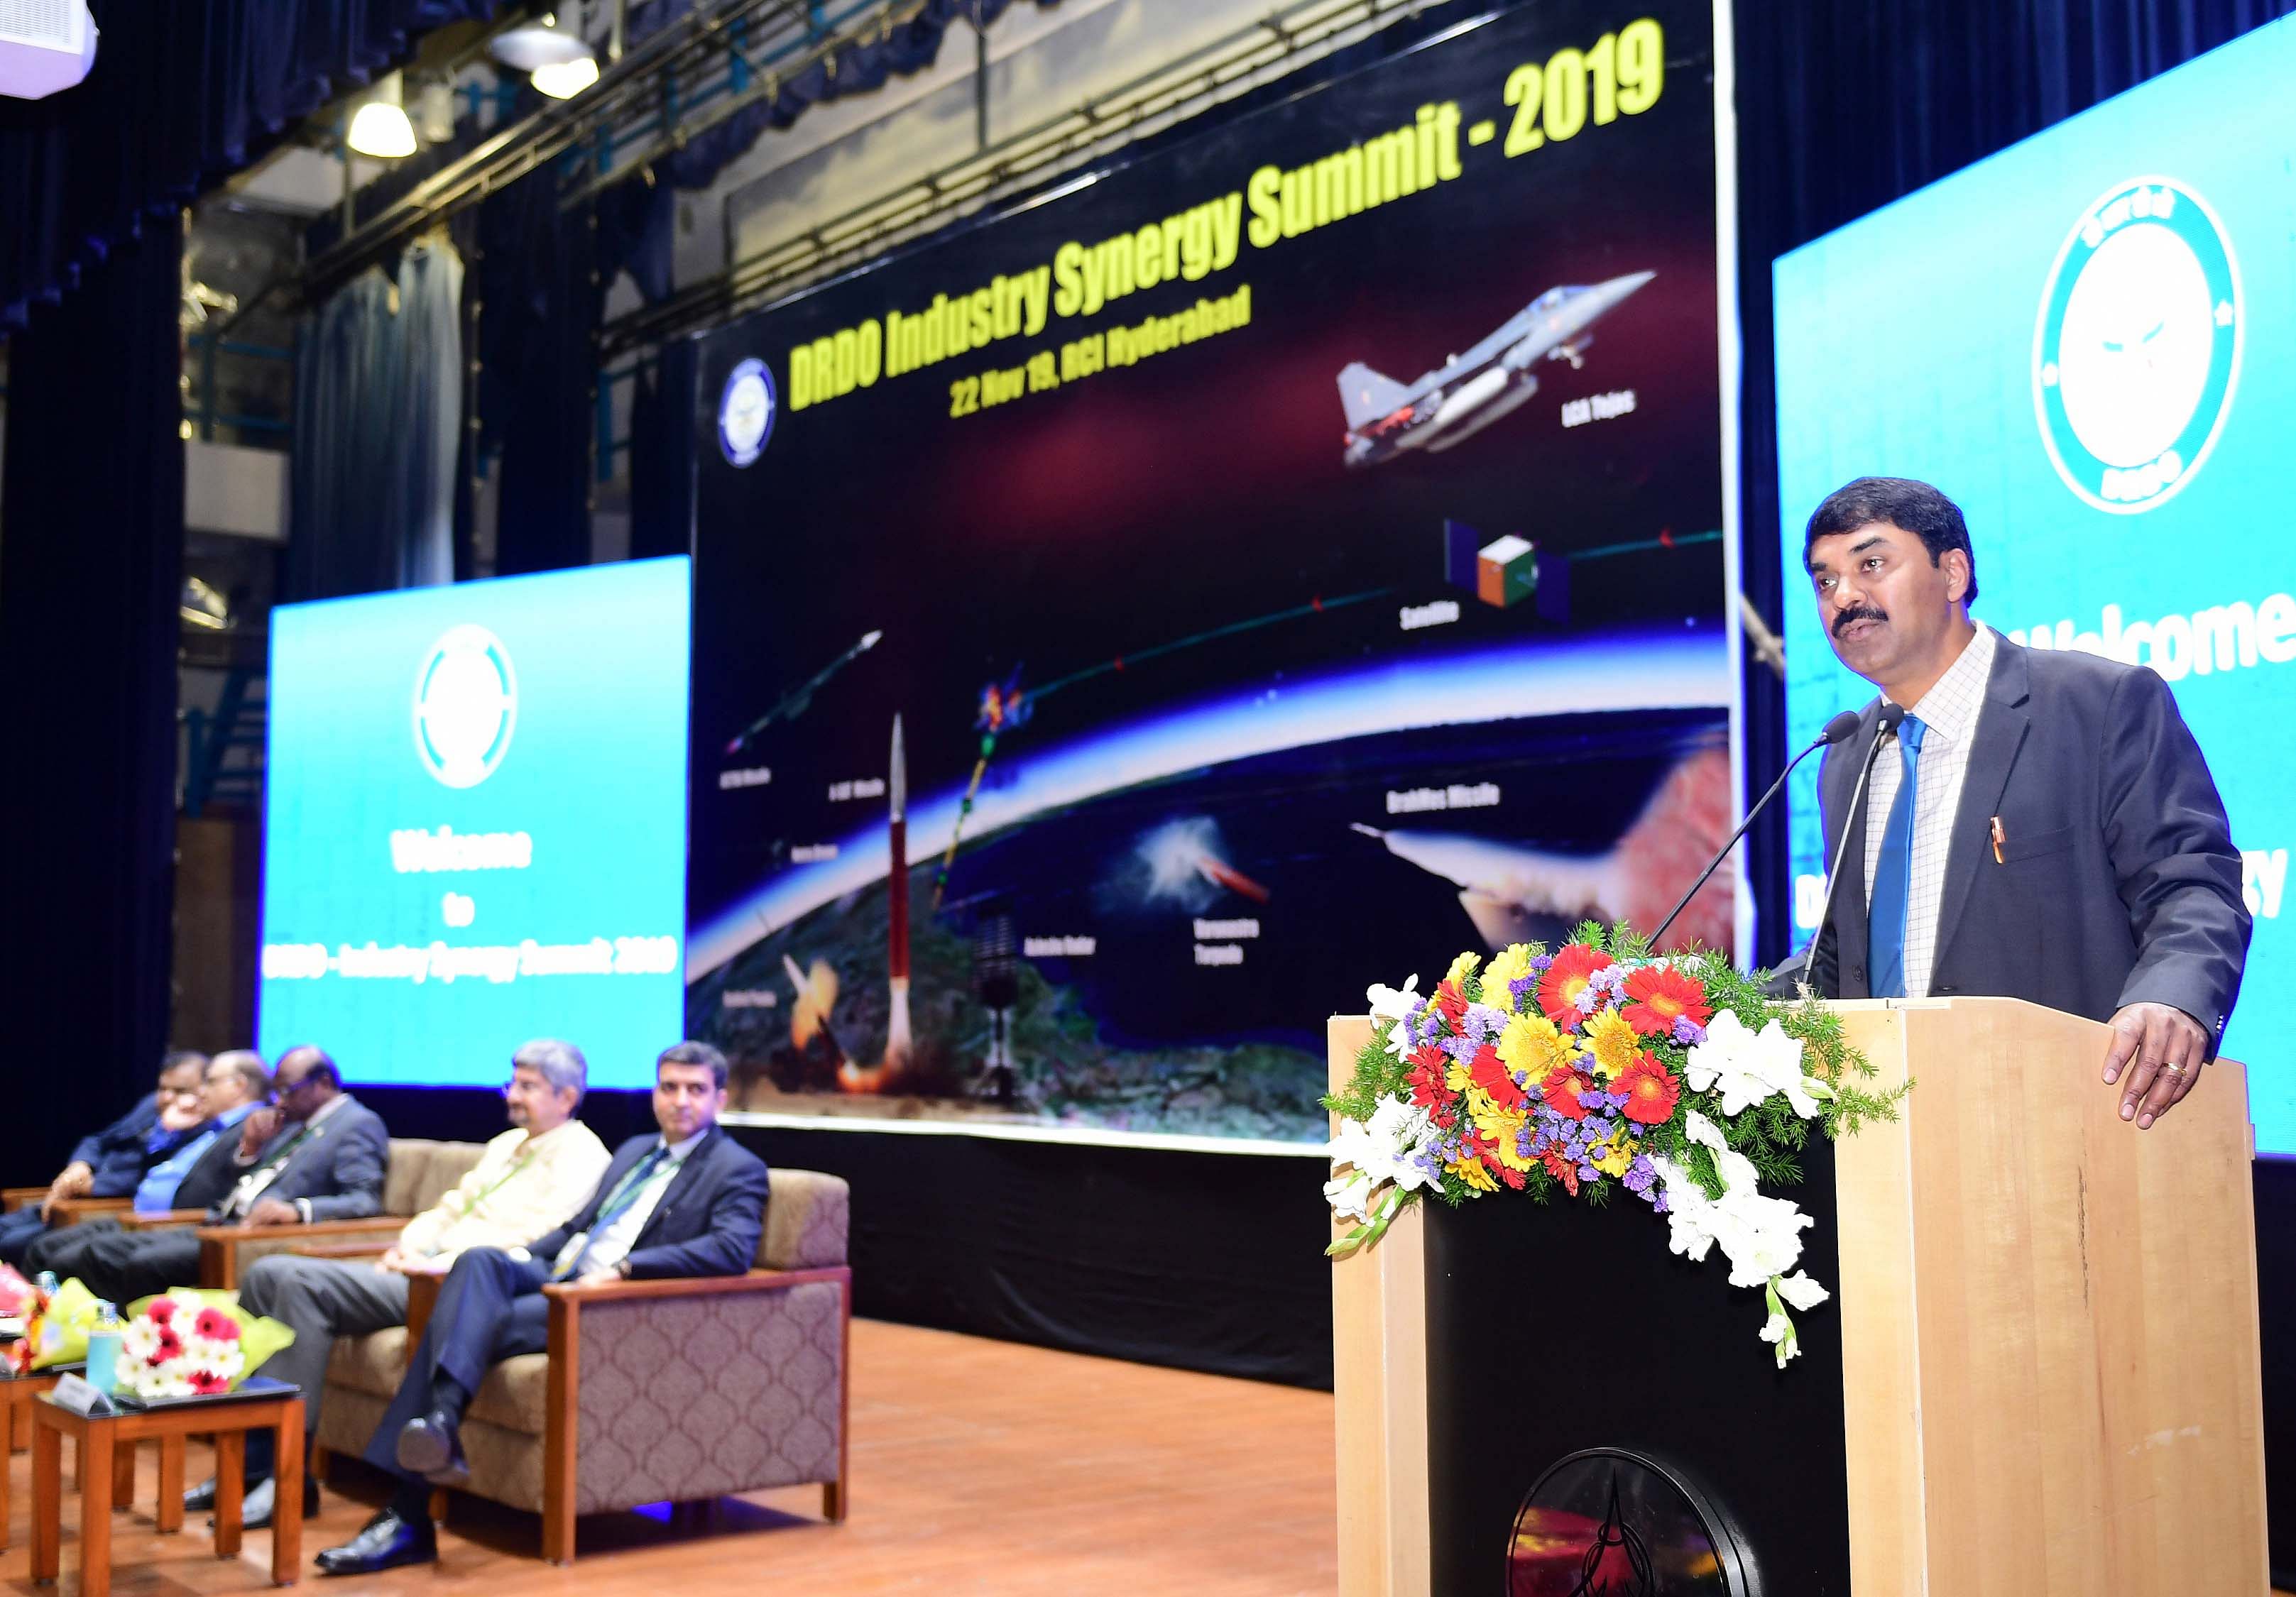 Dr G. Satheesh Reddy, Chairman, DRDO and Secretary DD (R&D) Delivering the inaugral address at the DRDO Industry Energy Summit. (DH Photo)